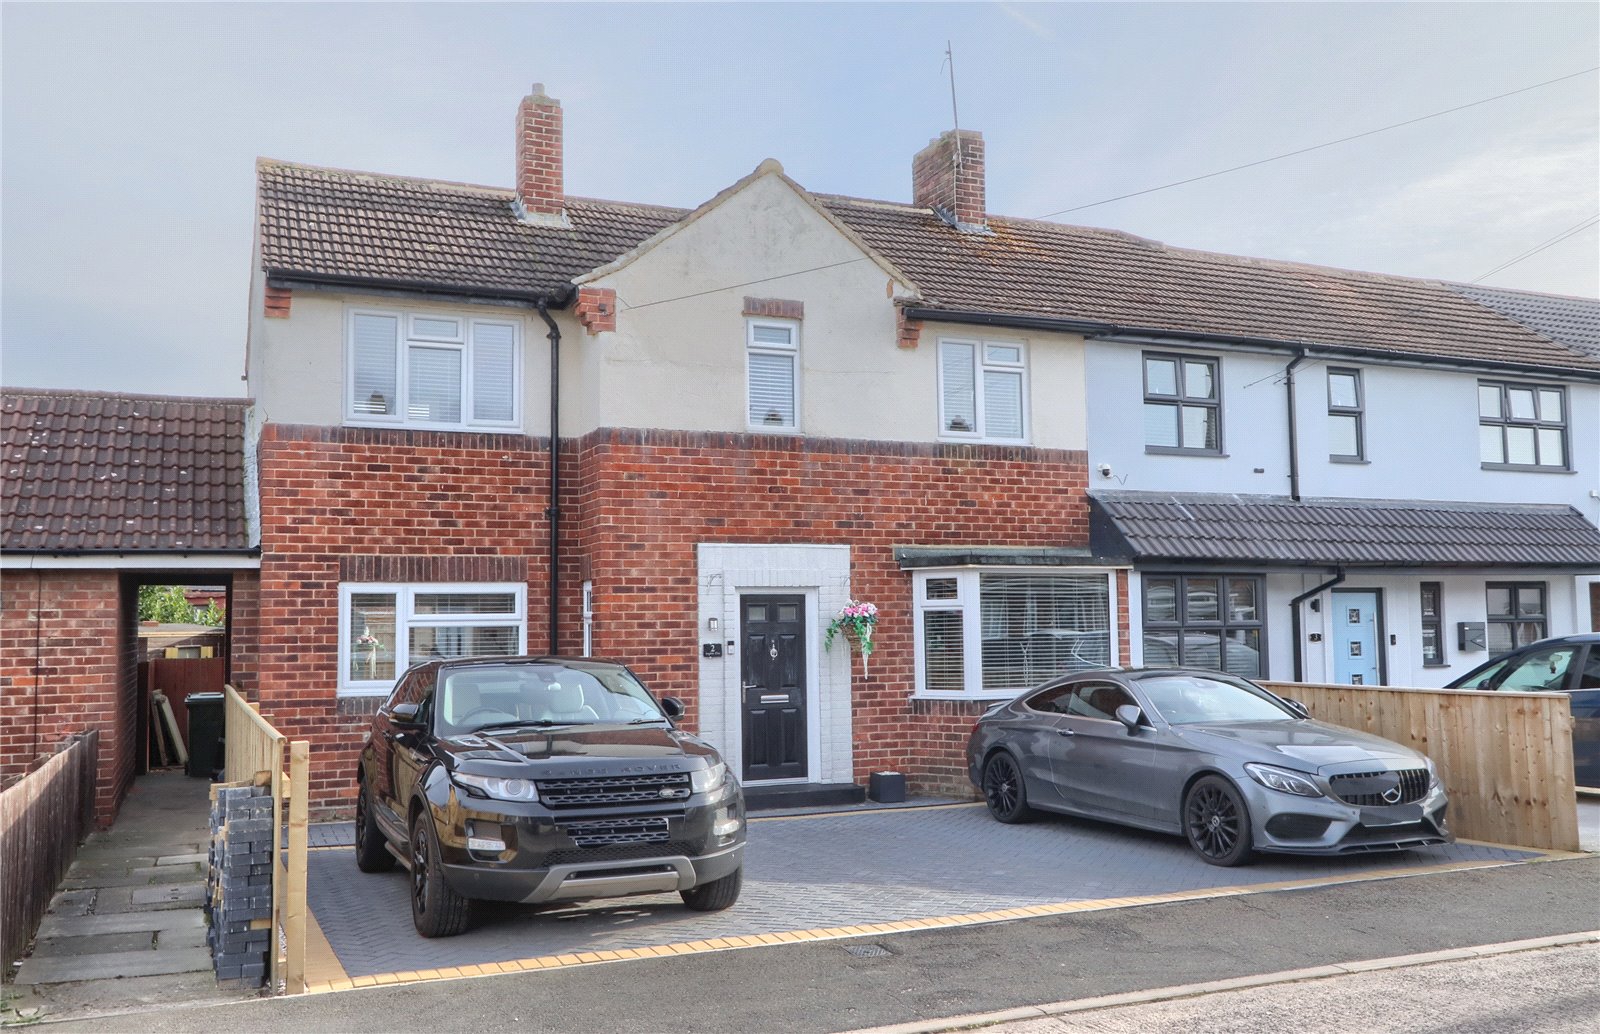 3 bed house for sale in Lingdale Close, Stockton-on-Tees 1